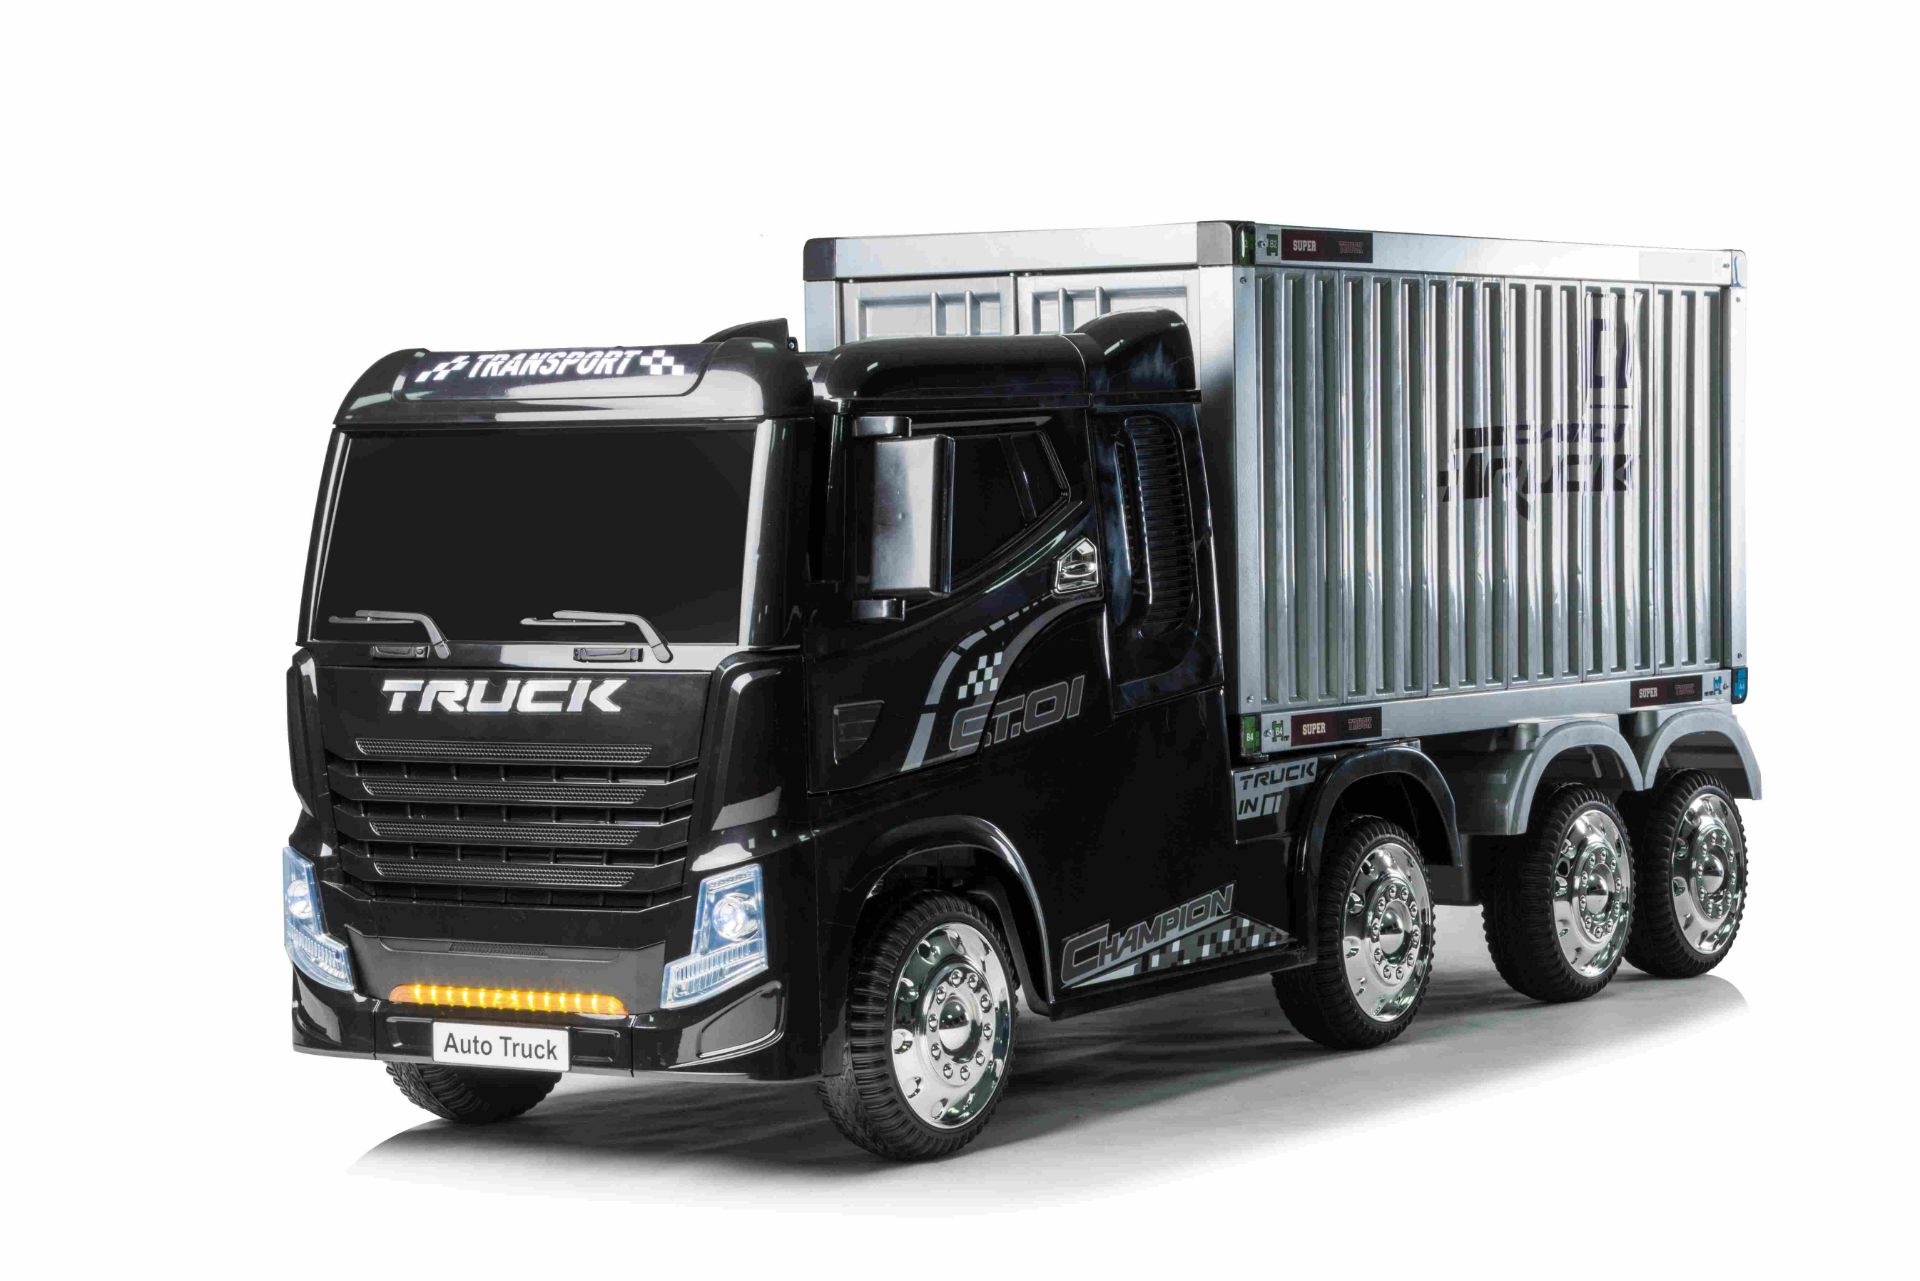 RIDE ON TRUCK WITH DETACHABLE CONTAINER AND PARENTAL REMOTE CONTROL 12V 4 WHEEL DRIVE JJ2011 - BLACK - Image 5 of 5